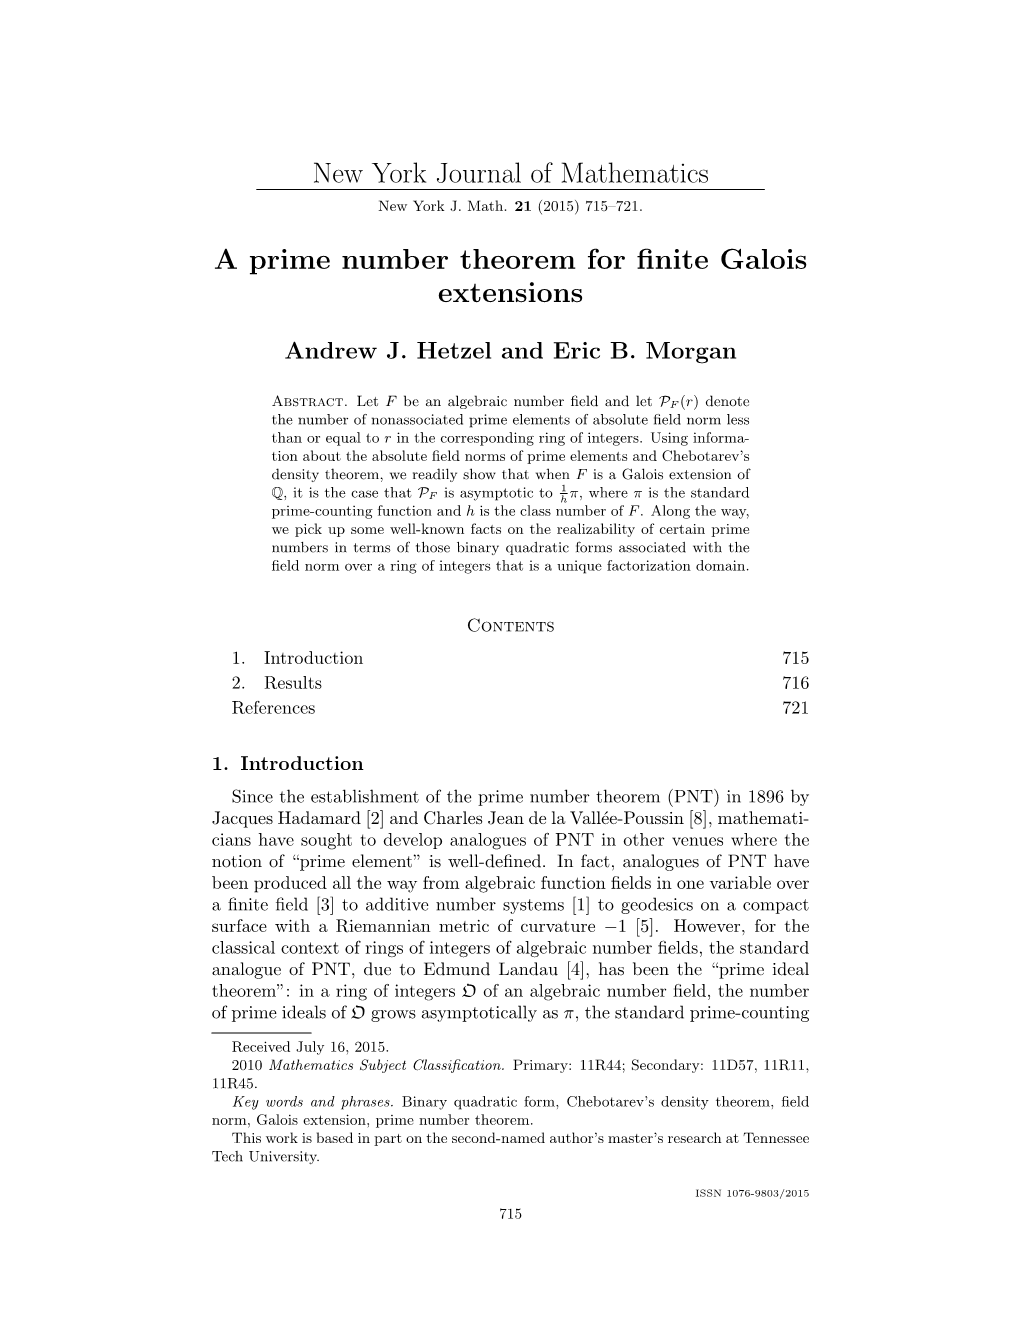 New York Journal of Mathematics a Prime Number Theorem for Finite Galois Extensions